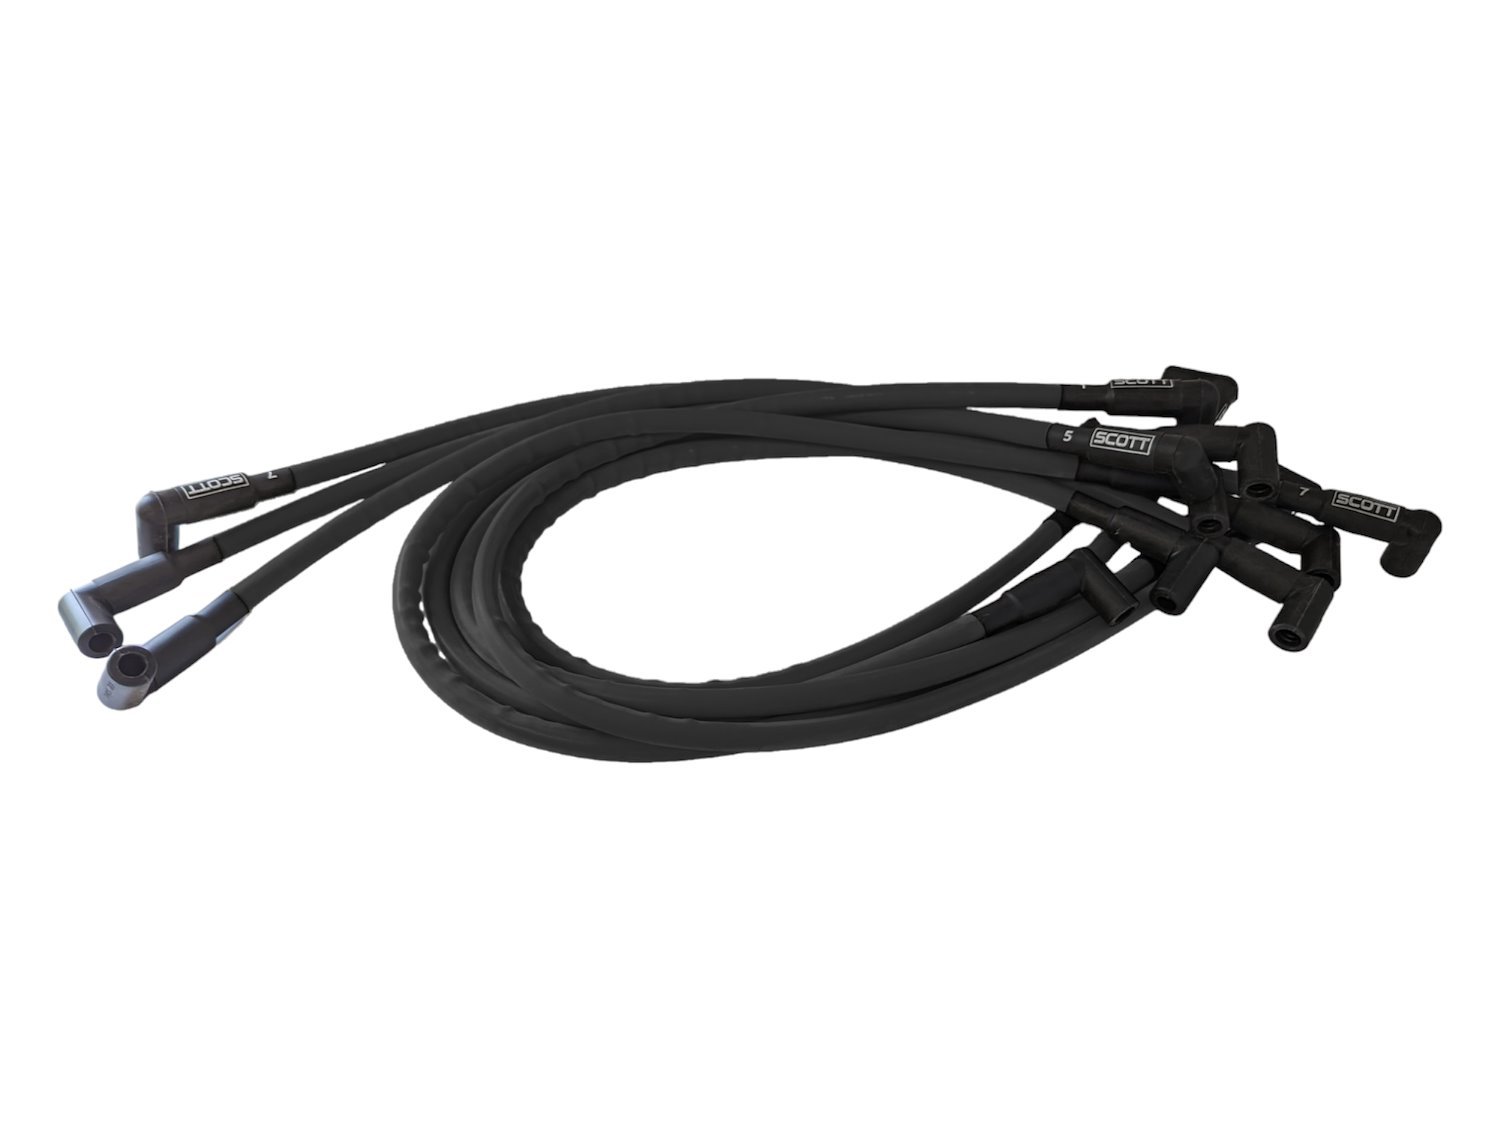 SPW-CH-516-1 High-Performance Silicone-Sleeved Spark Plug Wire Set for Big Block Chevy Dragster, Under Header [Black]